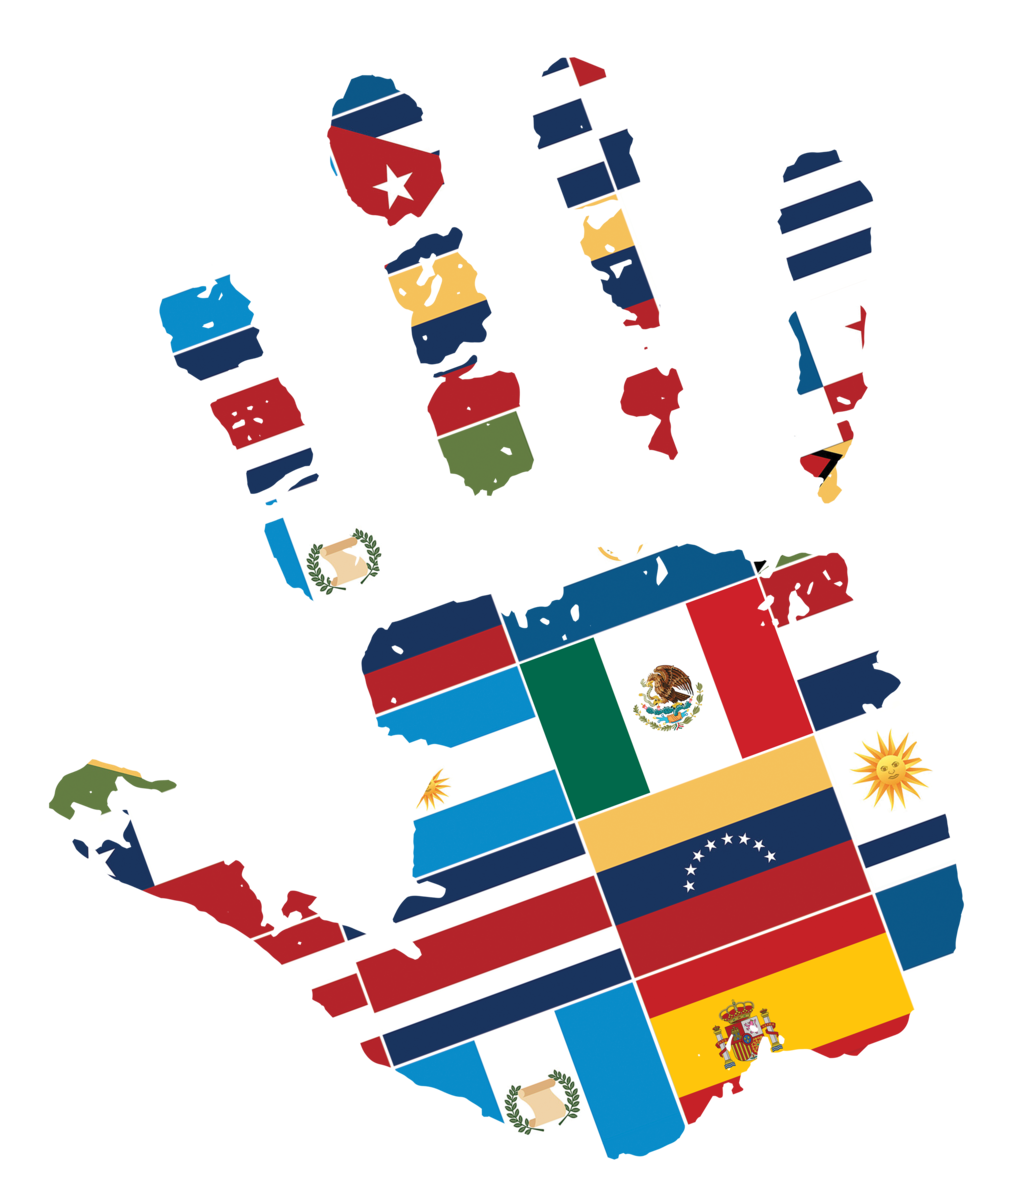 Hand print made up of different Latin American country flags